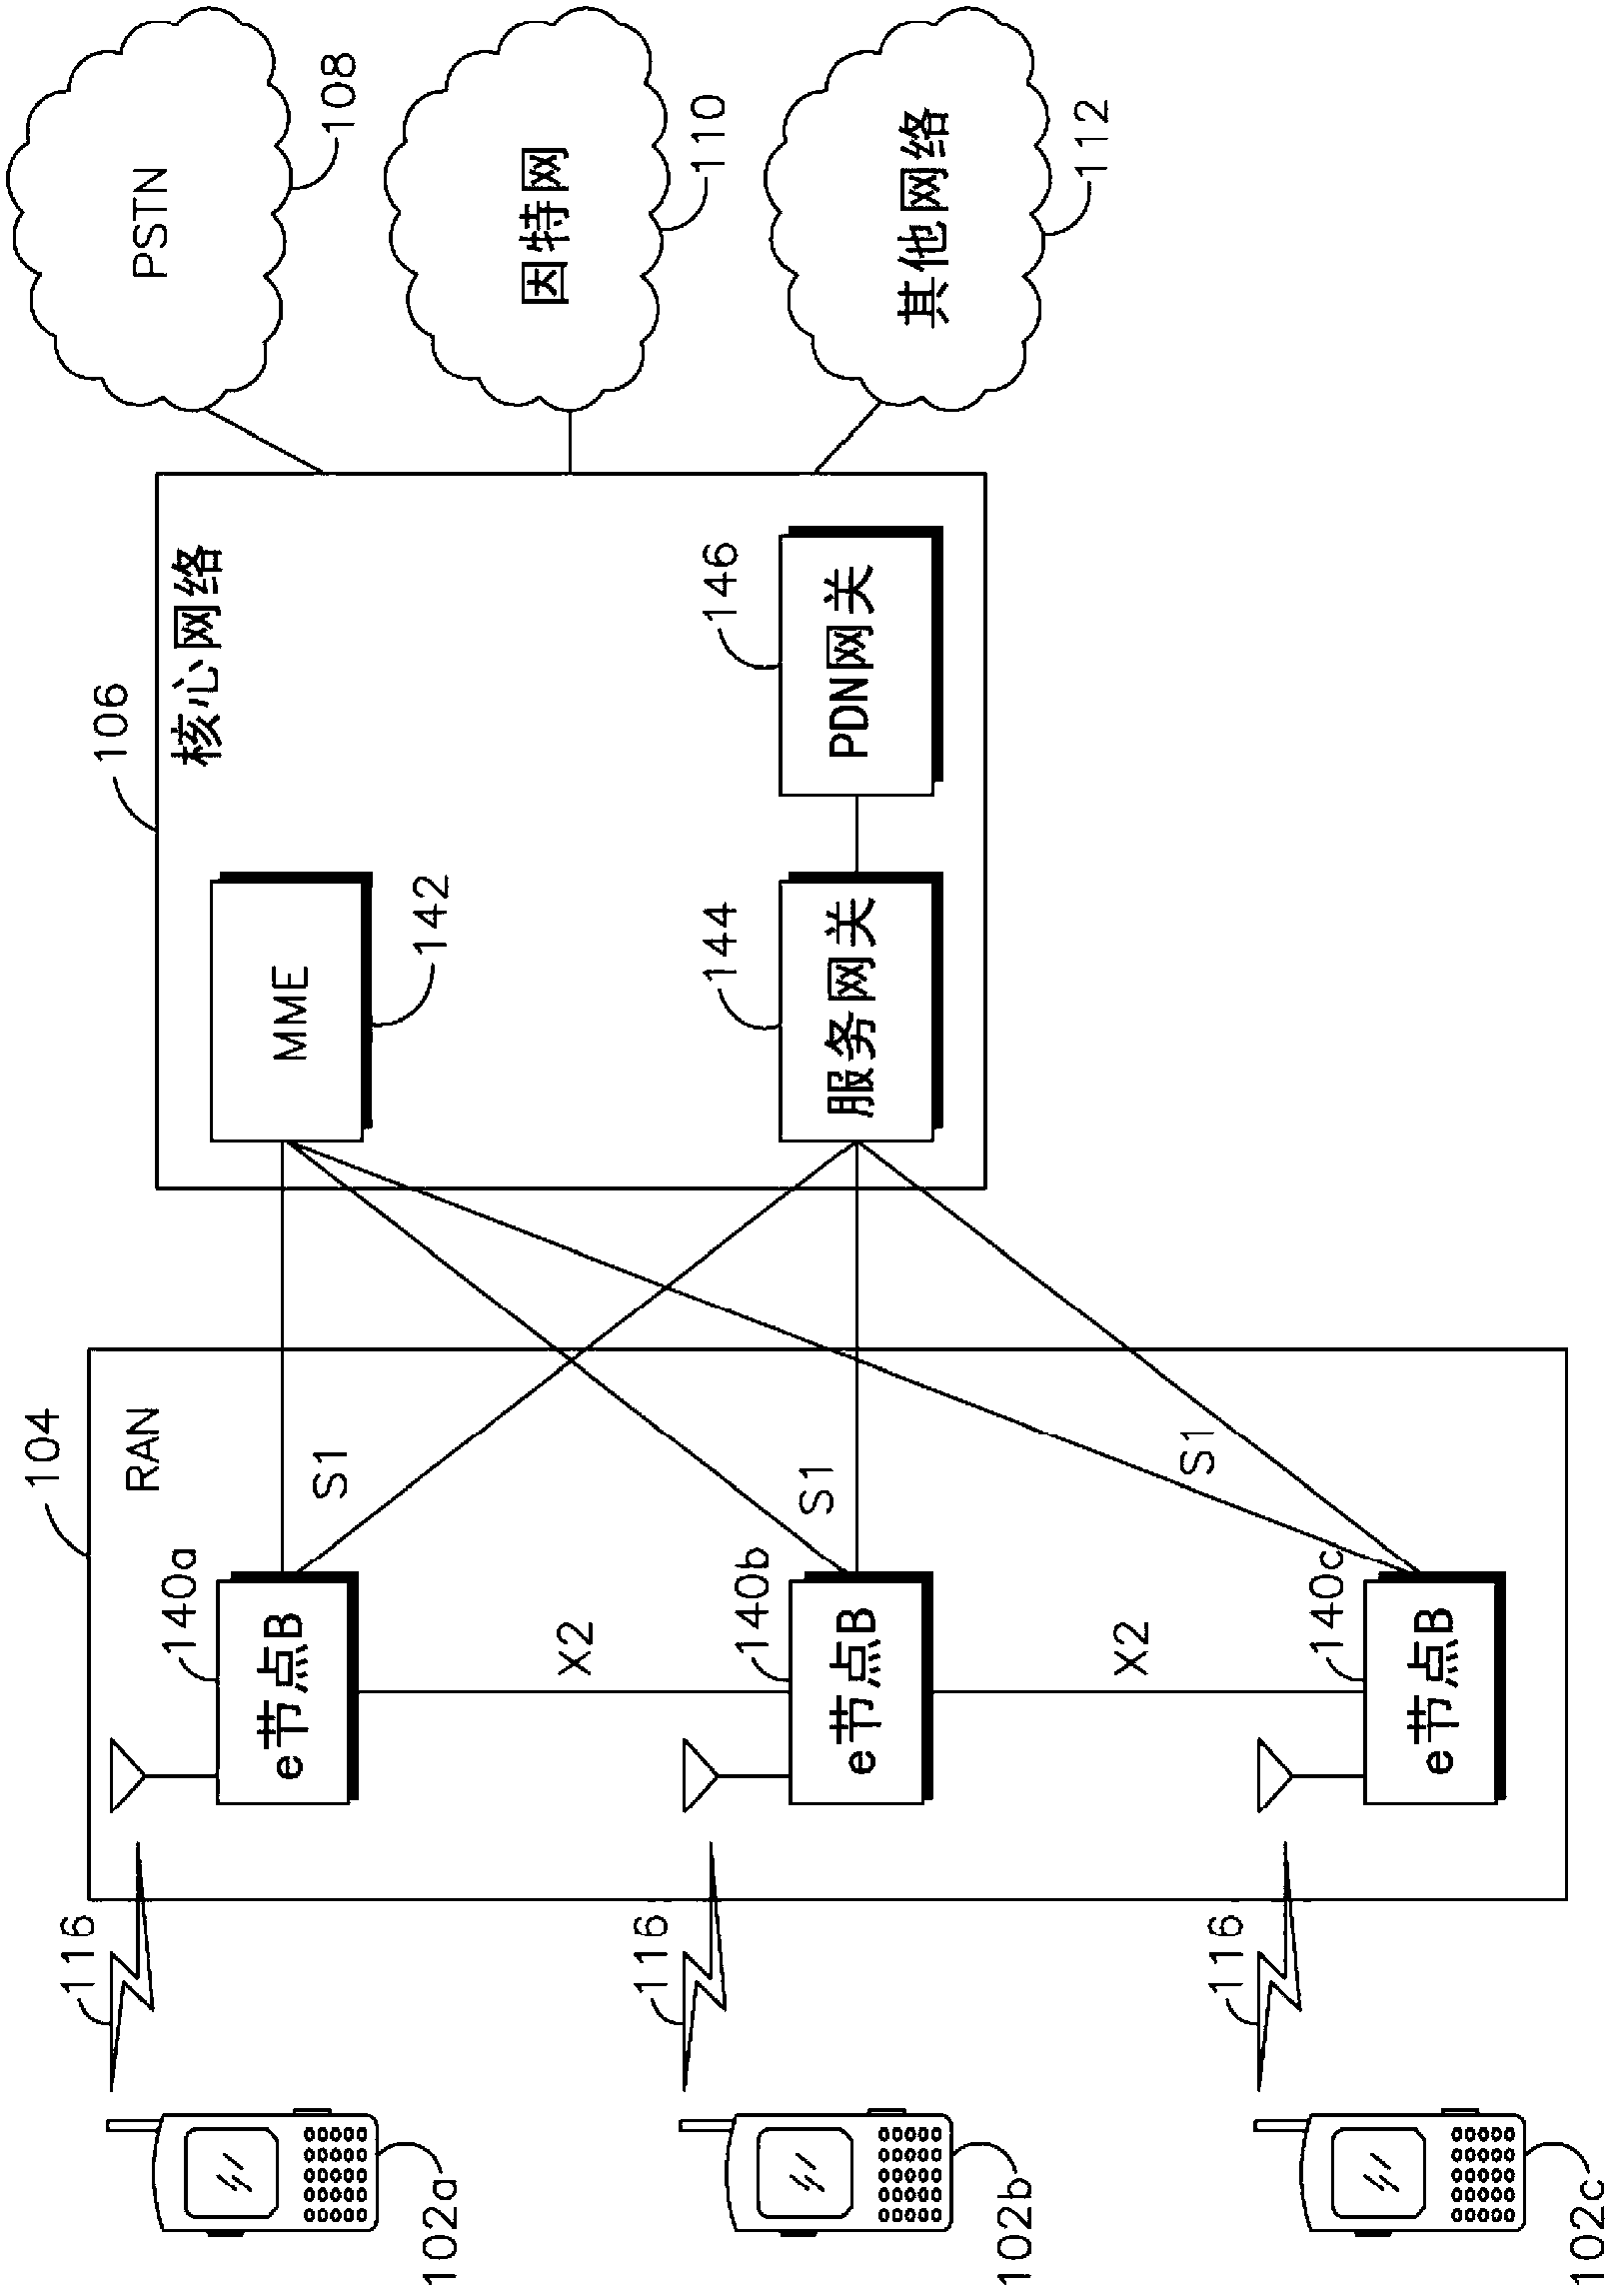 Method and apparatus for dynamic spectrum management